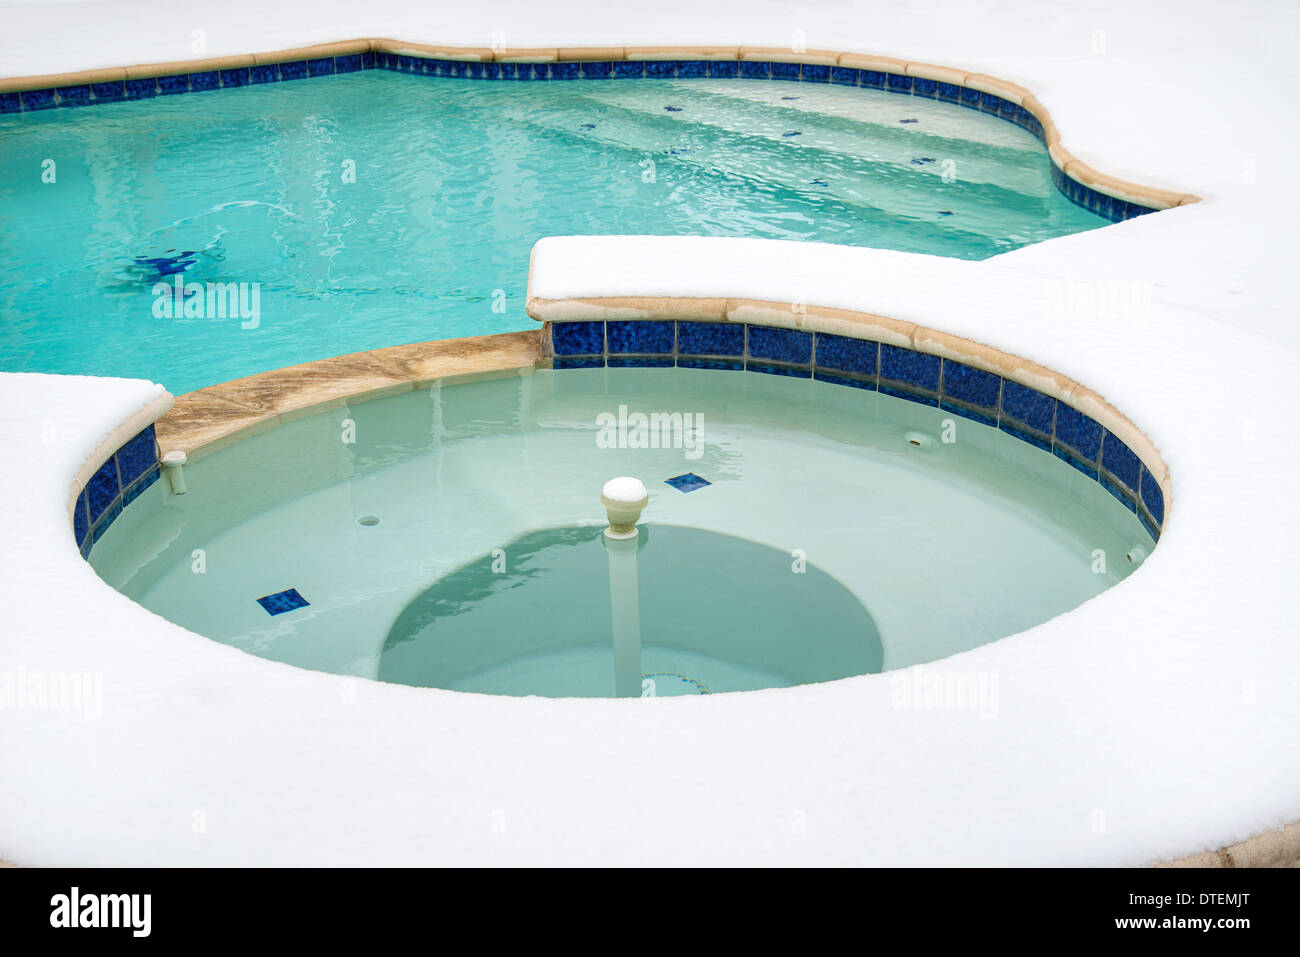 Outdoor hot tub or spa by swimming pool surrounded by snow in the winter Stock Photo